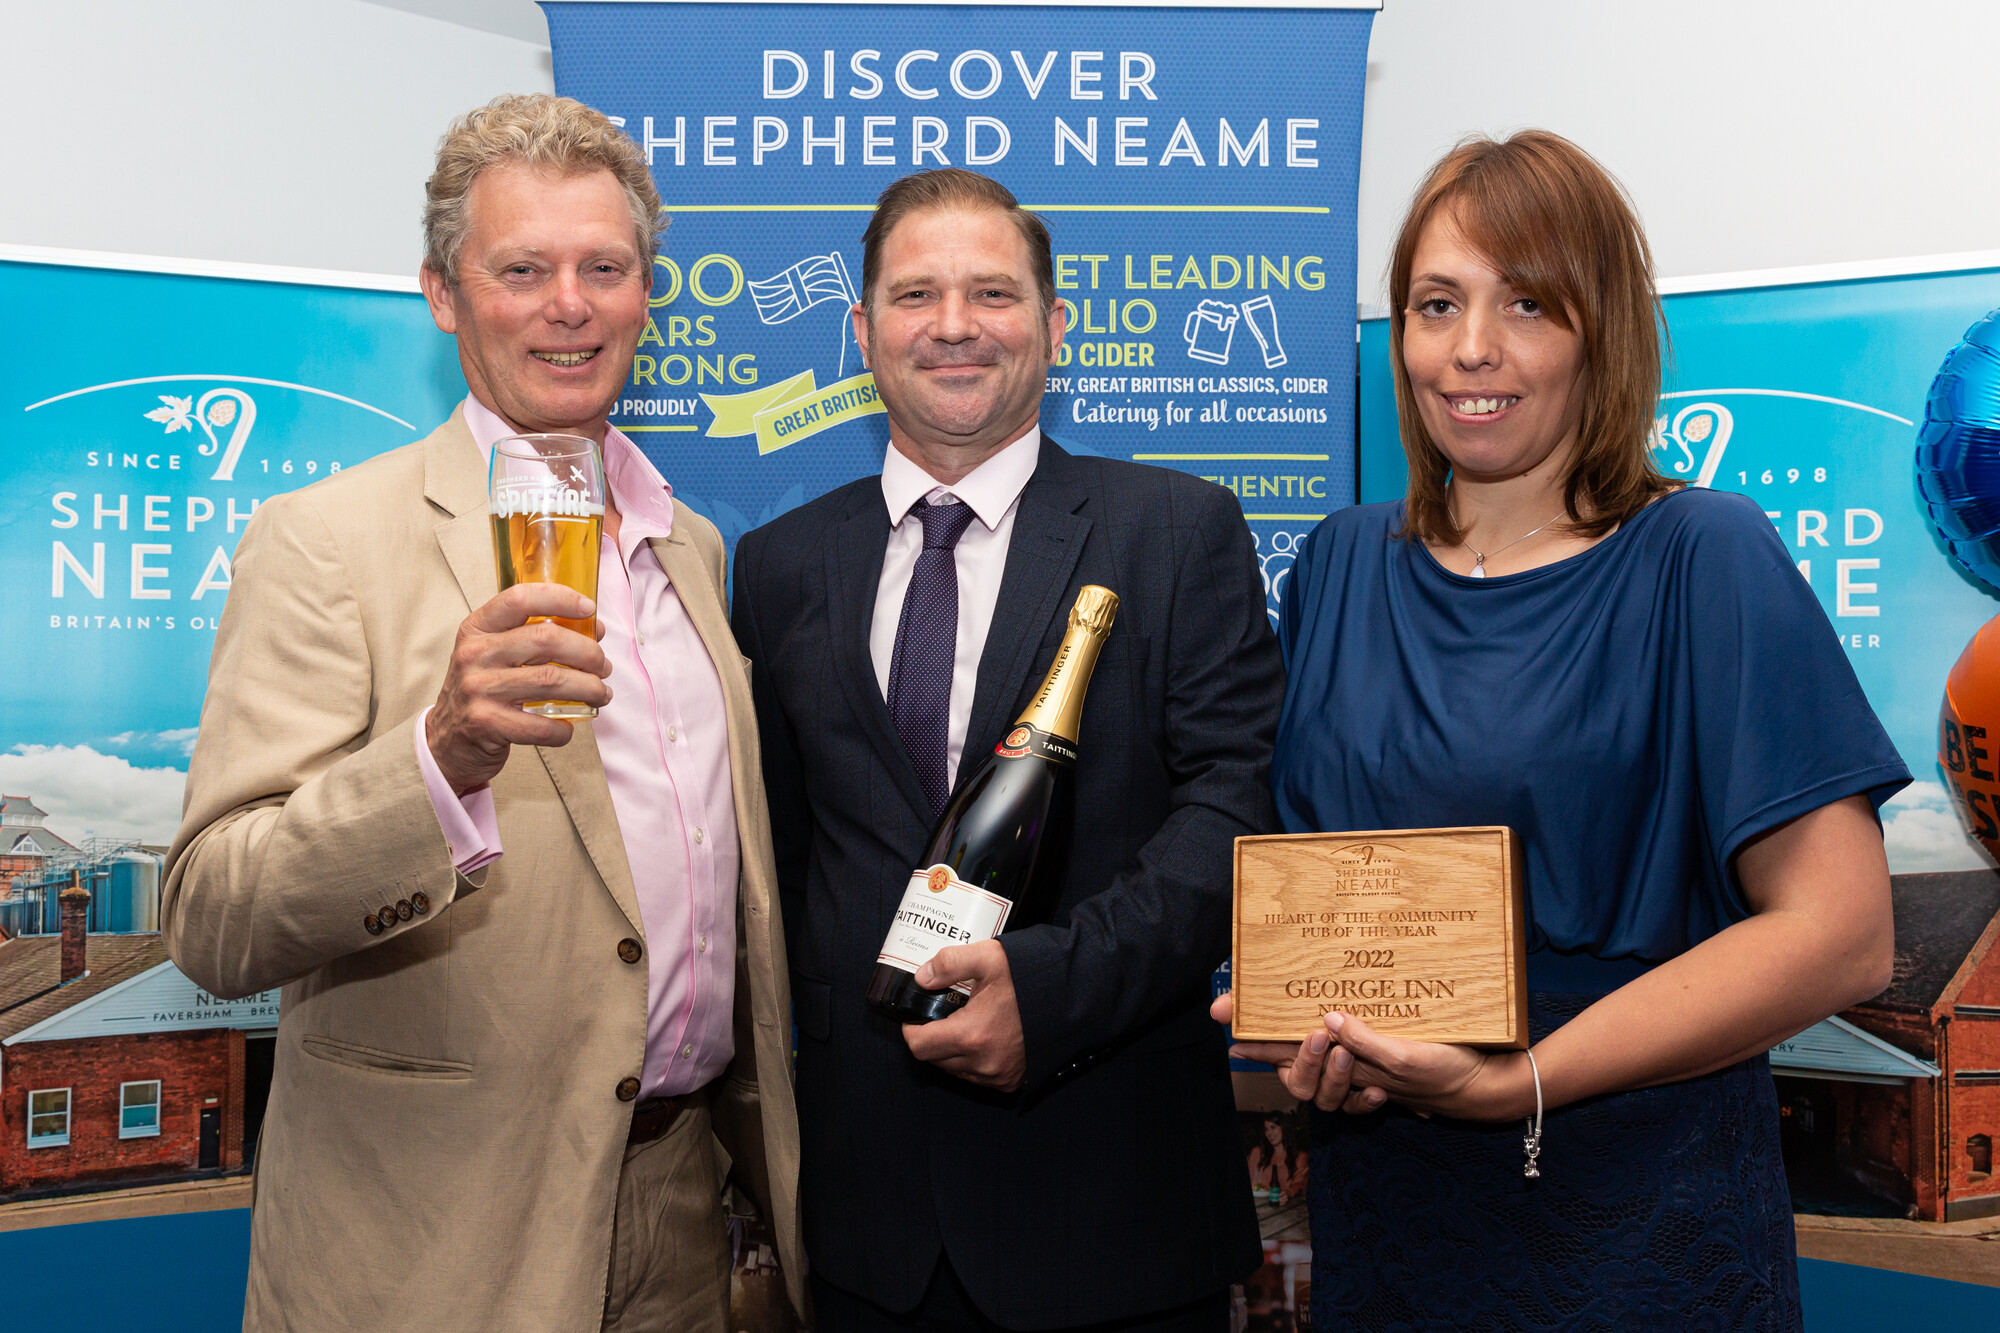 Licensees of the George Inn, Newnham, David and Claire Eliott with Chief Executive Jonathan Neame